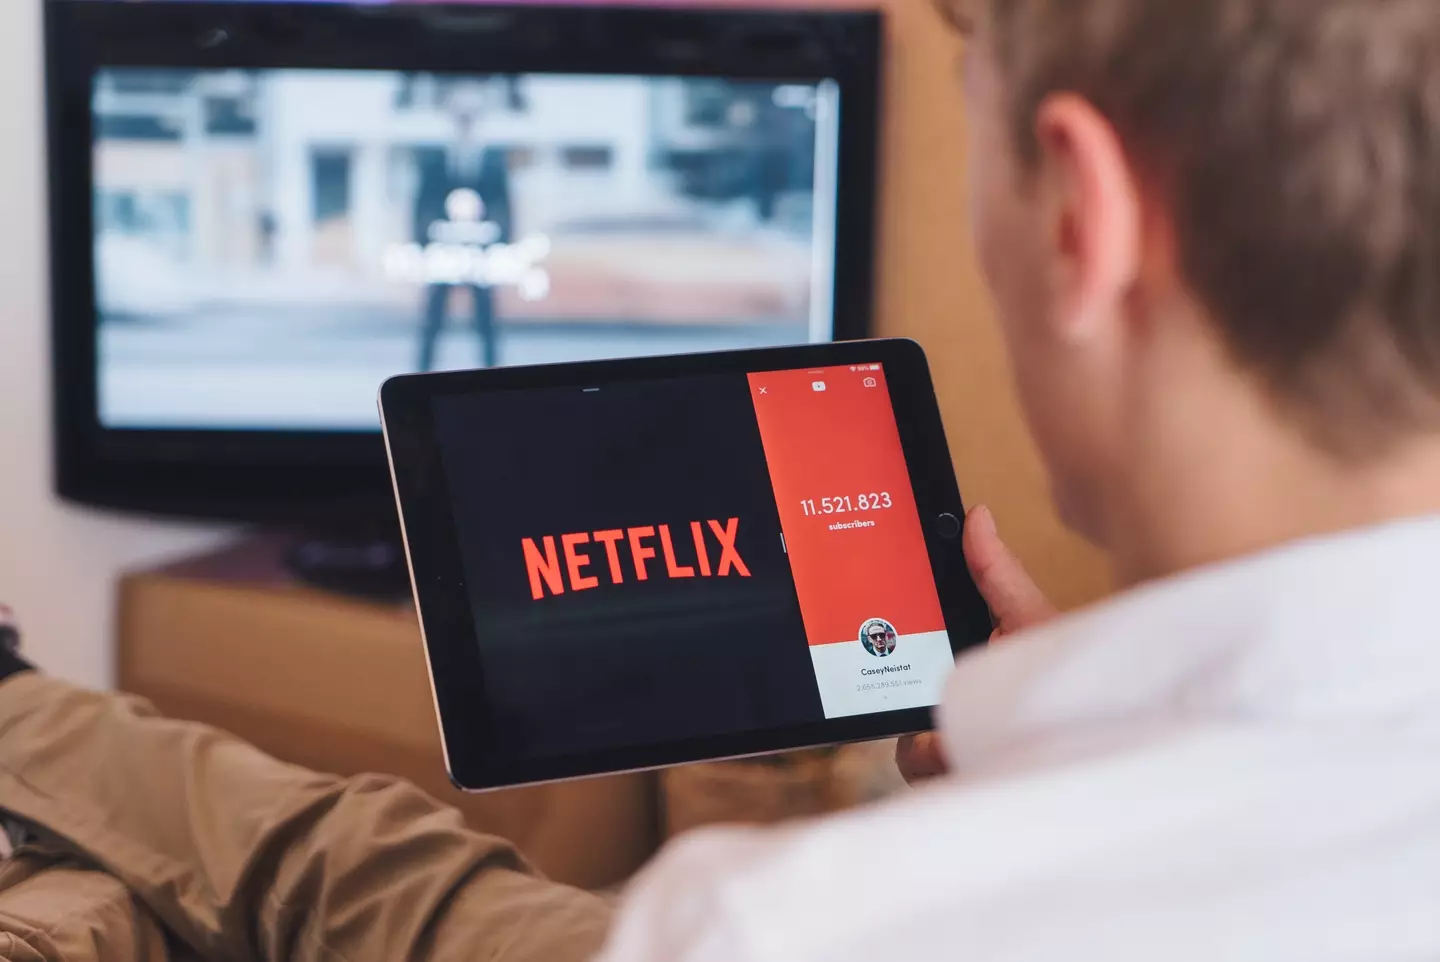 Live streaming could soon be a huge feature included on Netflix.